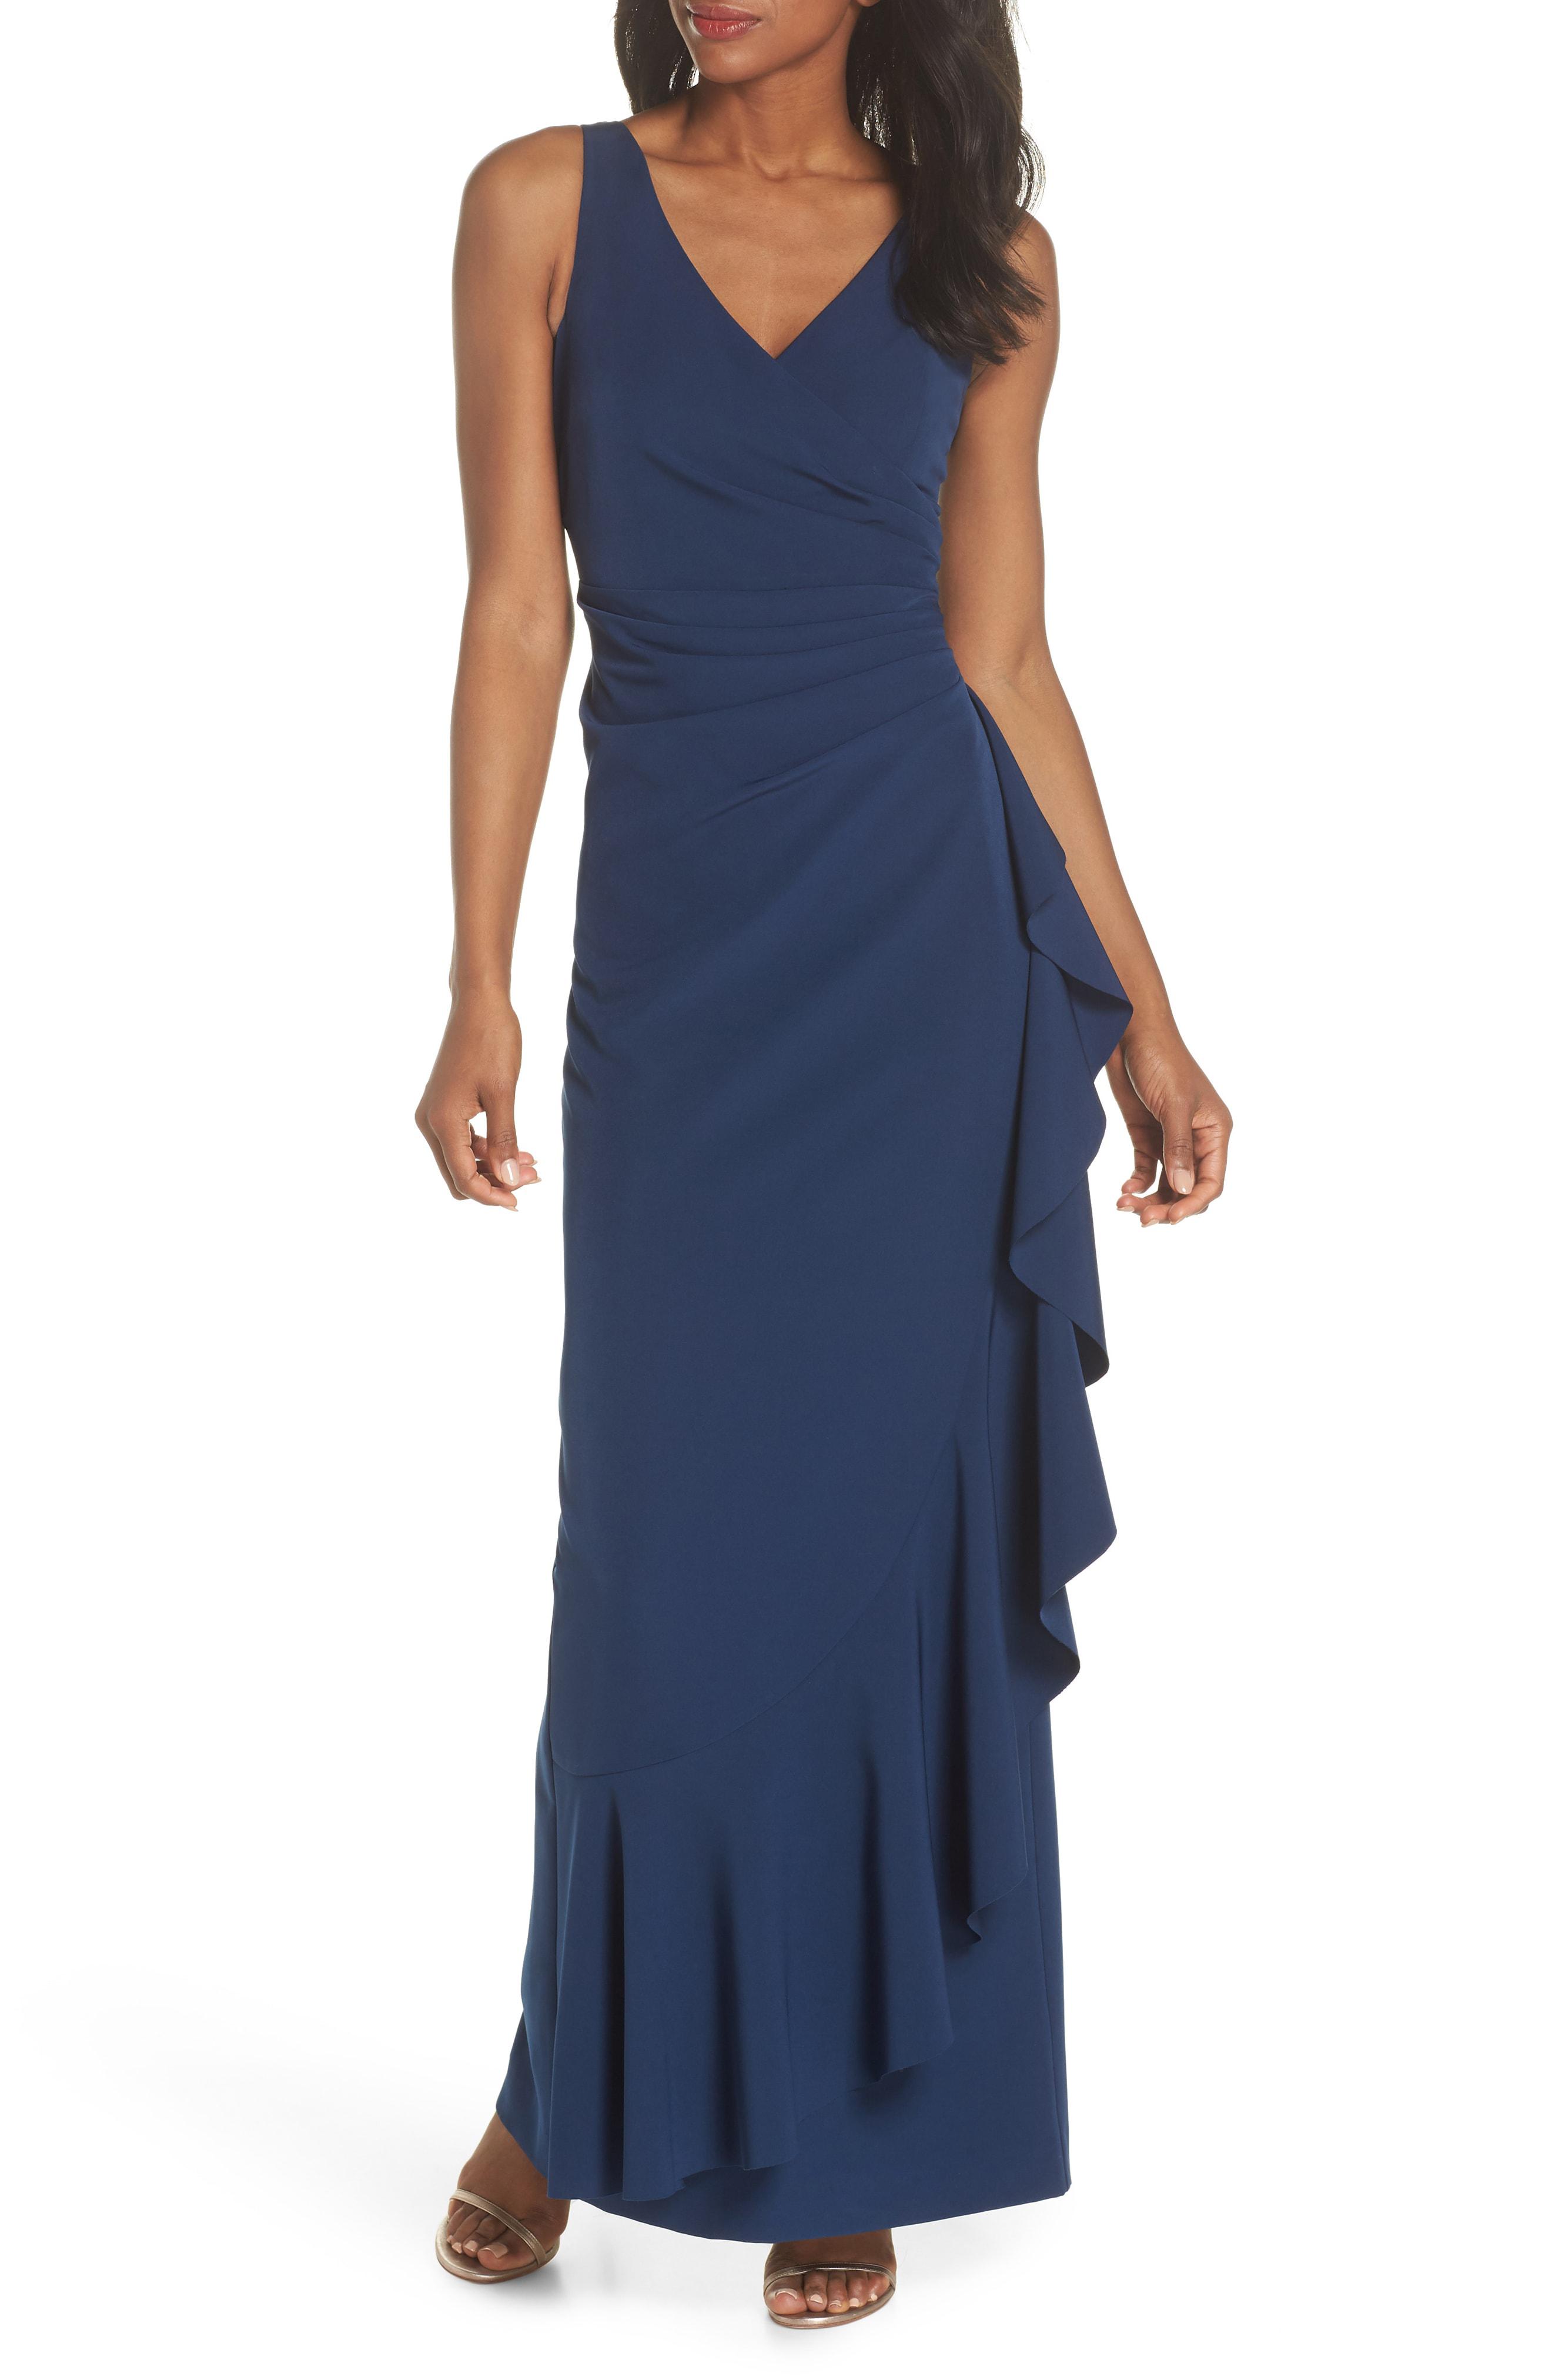 Lyst - Vince Camuto Laguna Faux Wrap Gown in Blue